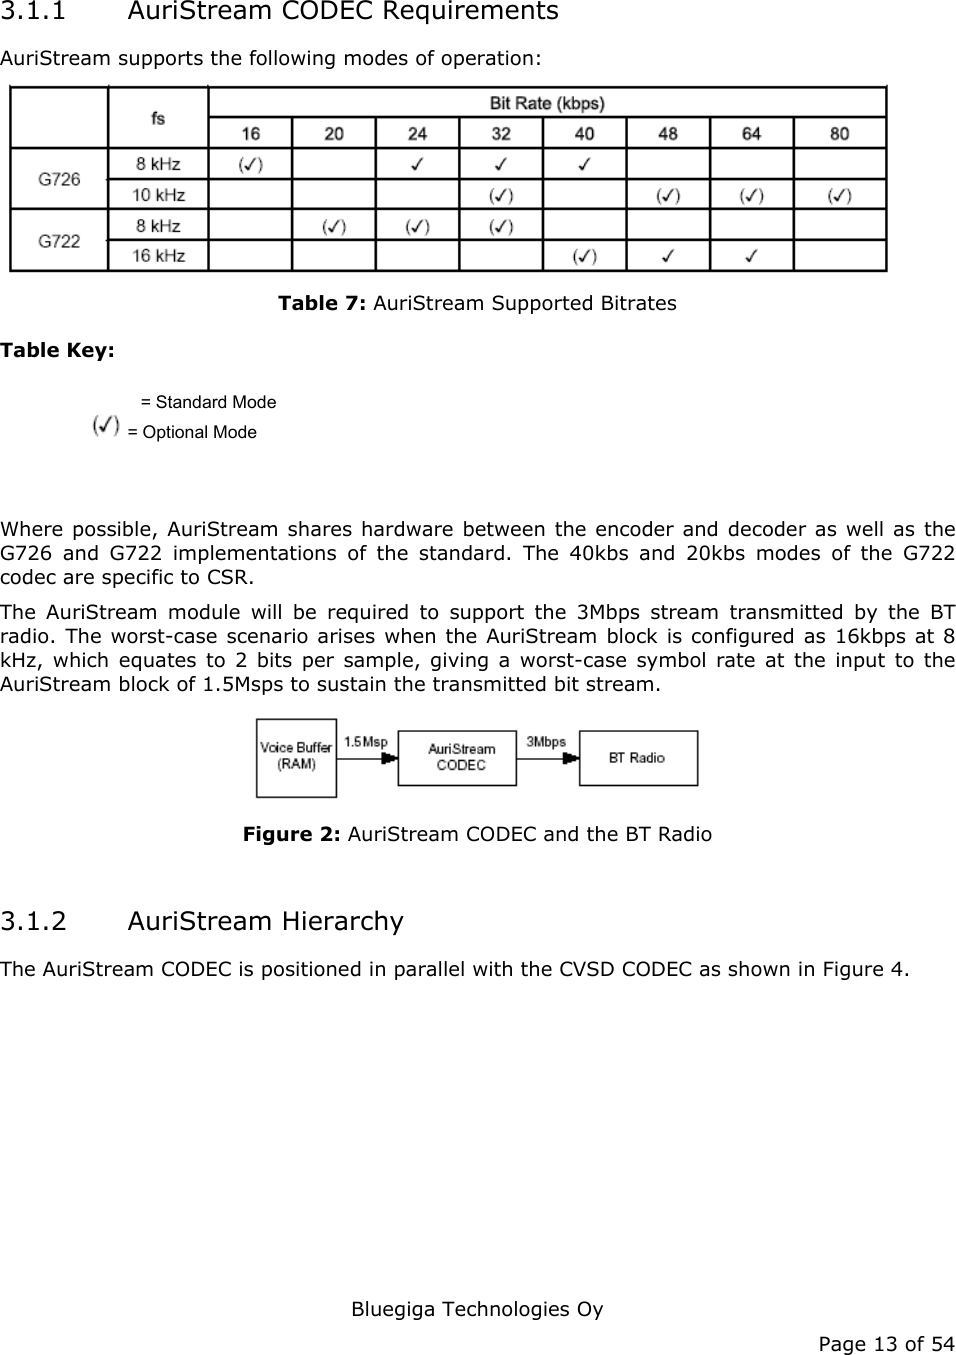   Bluegiga Technologies Oy Page 13 of 54 3.1.1 AuriStream CODEC Requirements AuriStream supports the following modes of operation:  Table 7: AuriStream Supported Bitrates Table Key: = Standard Mode      = Optional Mode  Where possible, AuriStream shares hardware between the encoder and decoder as well as the G726 and G722 implementations of the standard. The 40kbs and 20kbs modes of the G722 codec are specific to CSR. The AuriStream module will be required to support the 3Mbps stream transmitted by the BT radio. The worst-case scenario arises when the AuriStream block is configured as 16kbps at 8 kHz, which equates to 2 bits per sample, giving a worst-case symbol rate at the input to the AuriStream block of 1.5Msps to sustain the transmitted bit stream.  Figure 2: AuriStream CODEC and the BT Radio  3.1.2 AuriStream Hierarchy The AuriStream CODEC is positioned in parallel with the CVSD CODEC as shown in Figure 4. 